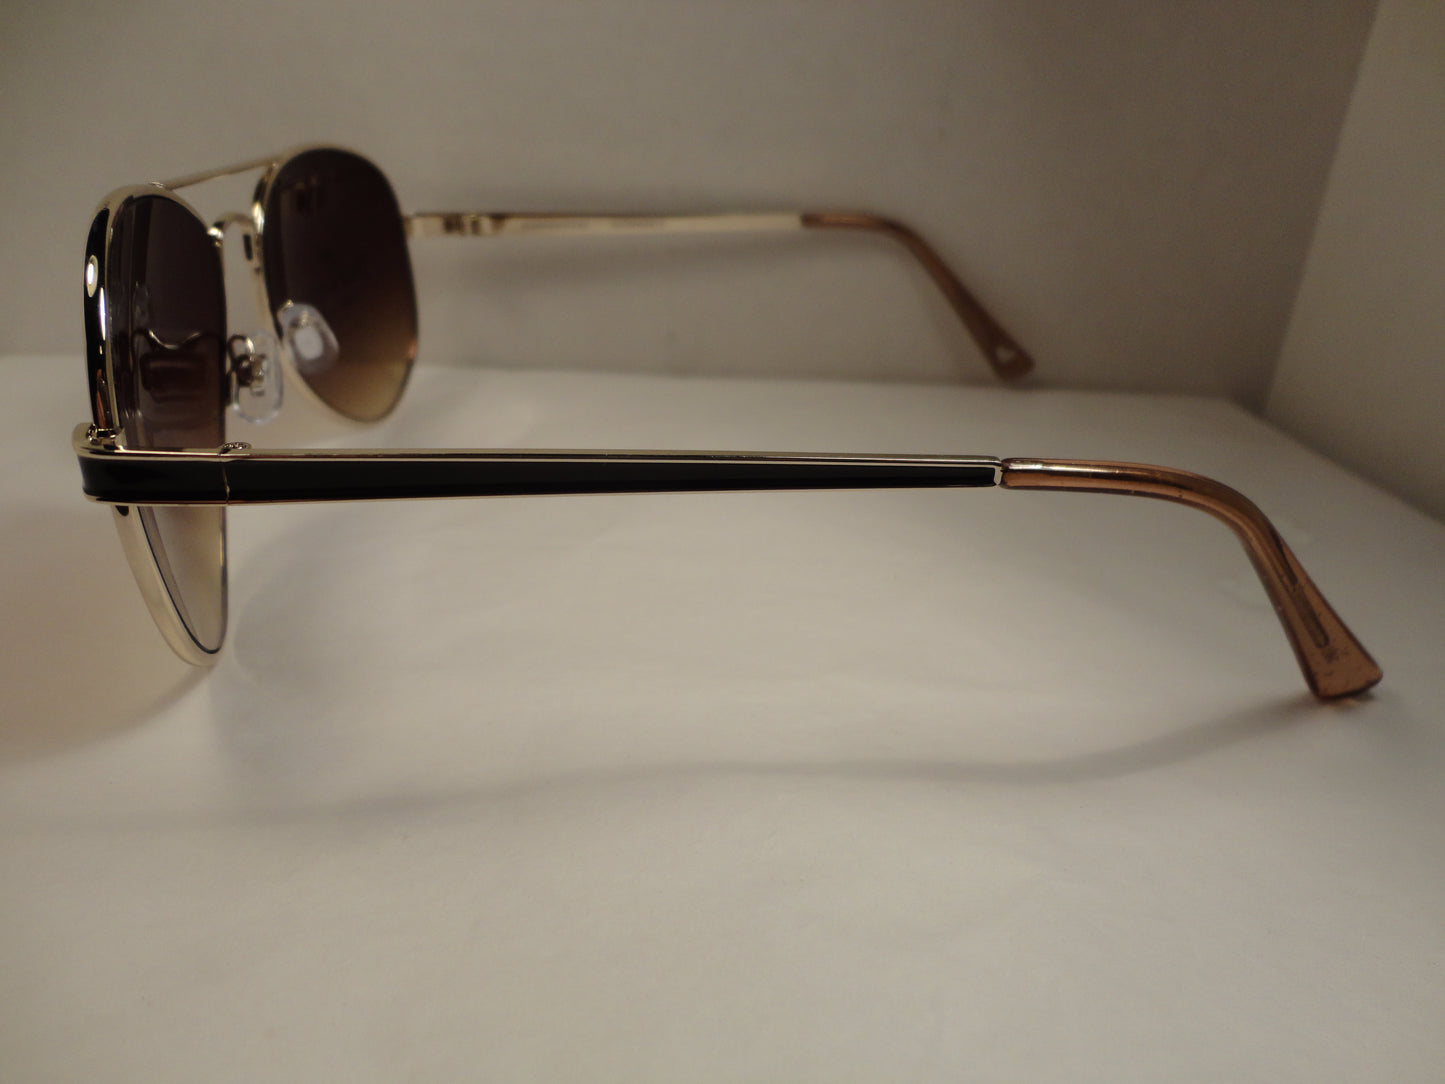 Juicy Couture Sunglasses Gold & Brown NWT SKU 400-57